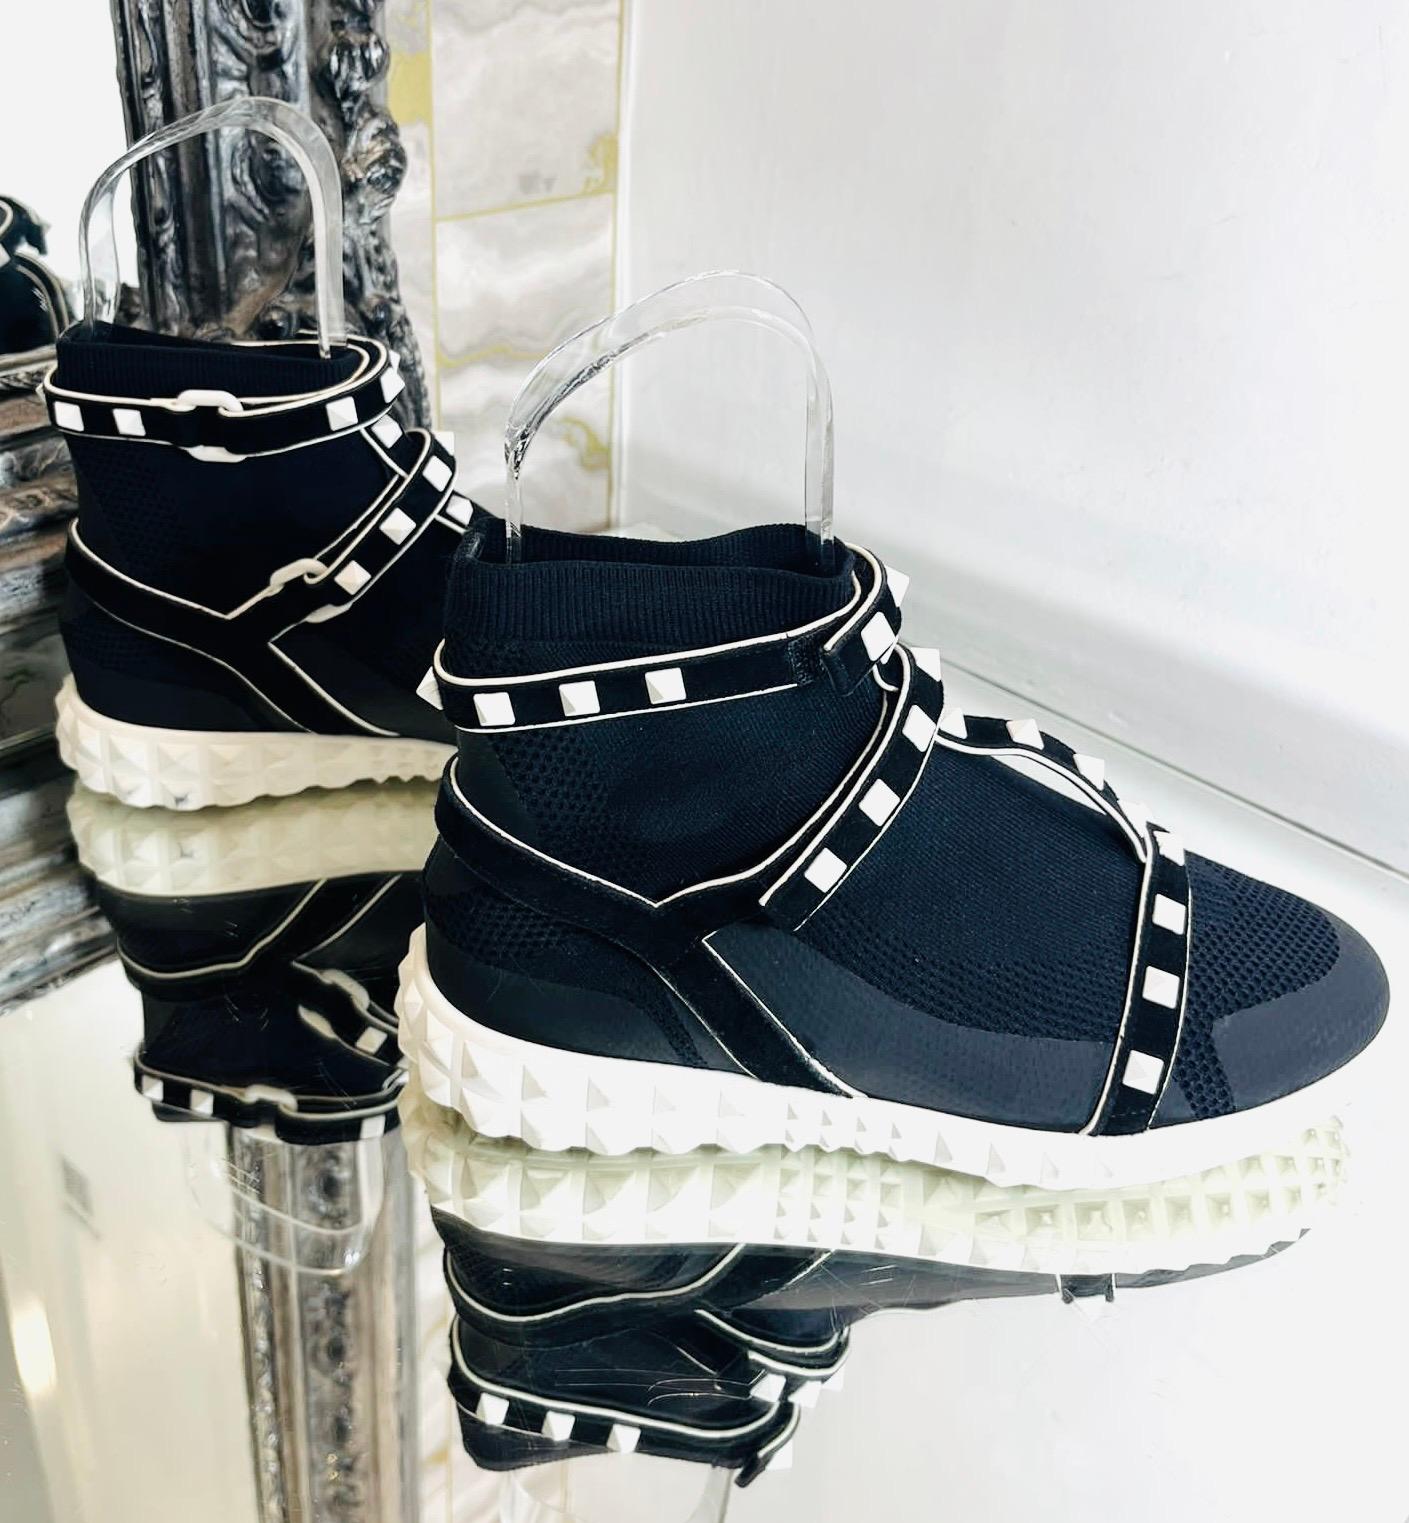 Valentino Rockstud Sock Sneakers In Good Condition For Sale In London, GB